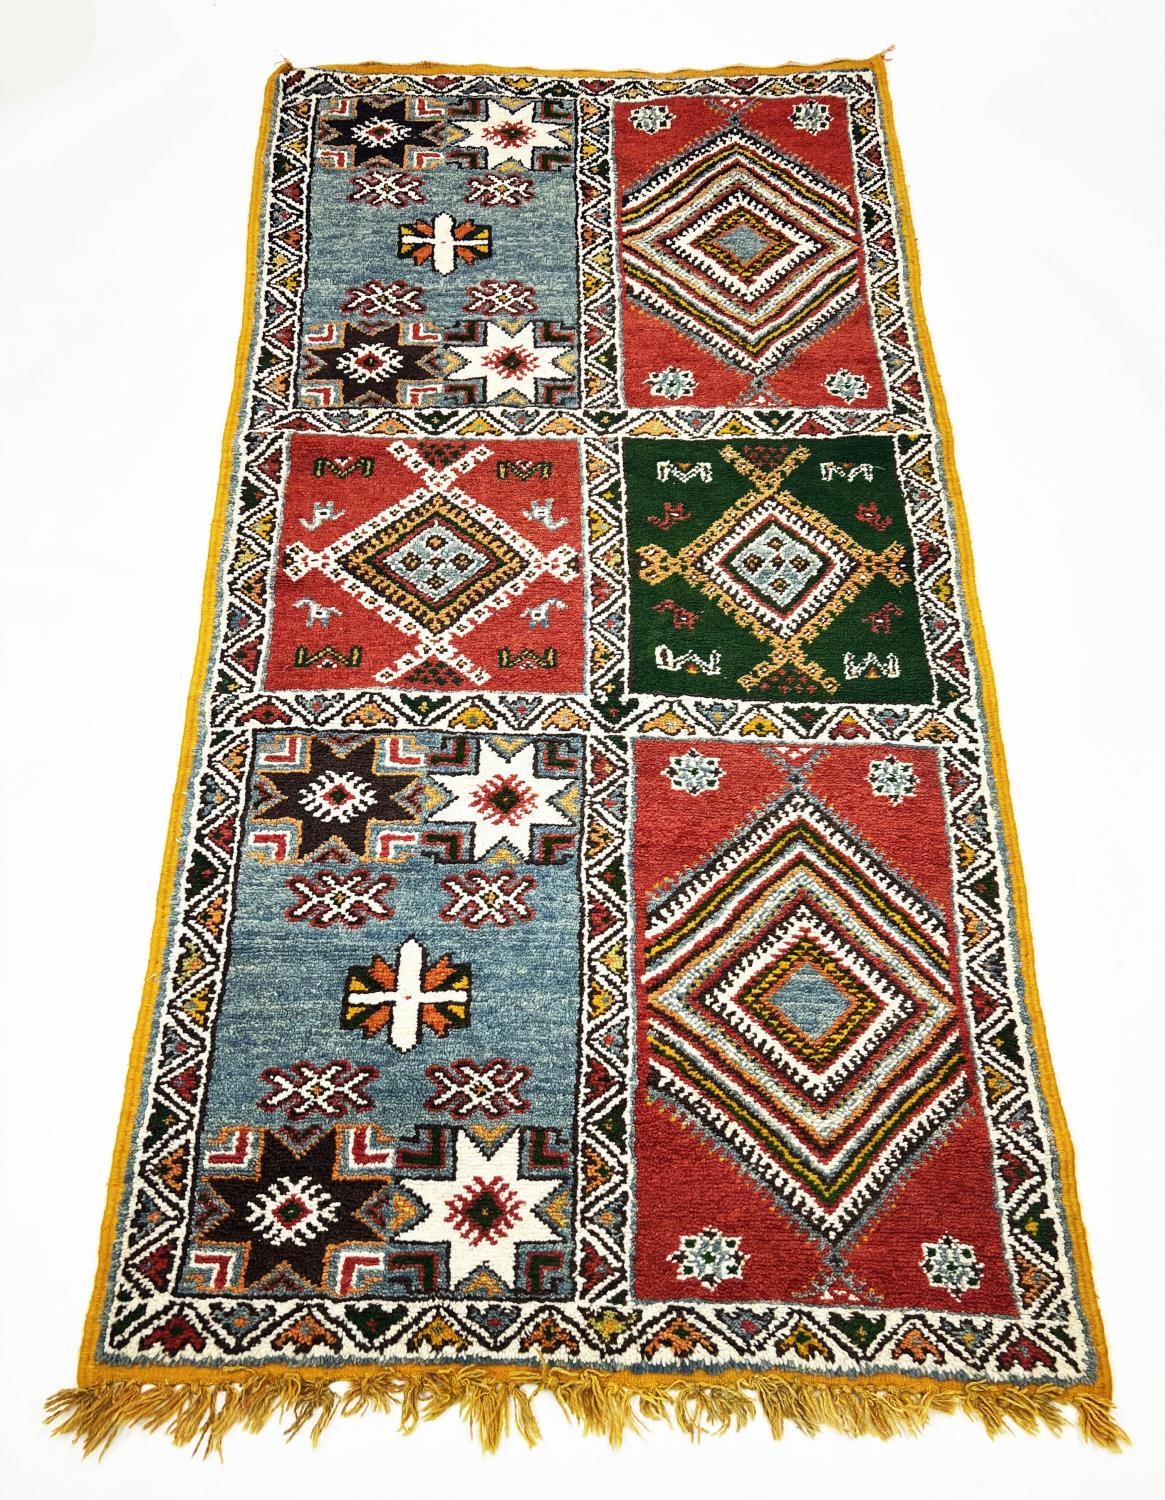 MOROCCAN RUG, 215cm x 111cm, vintage hand knotted wool.